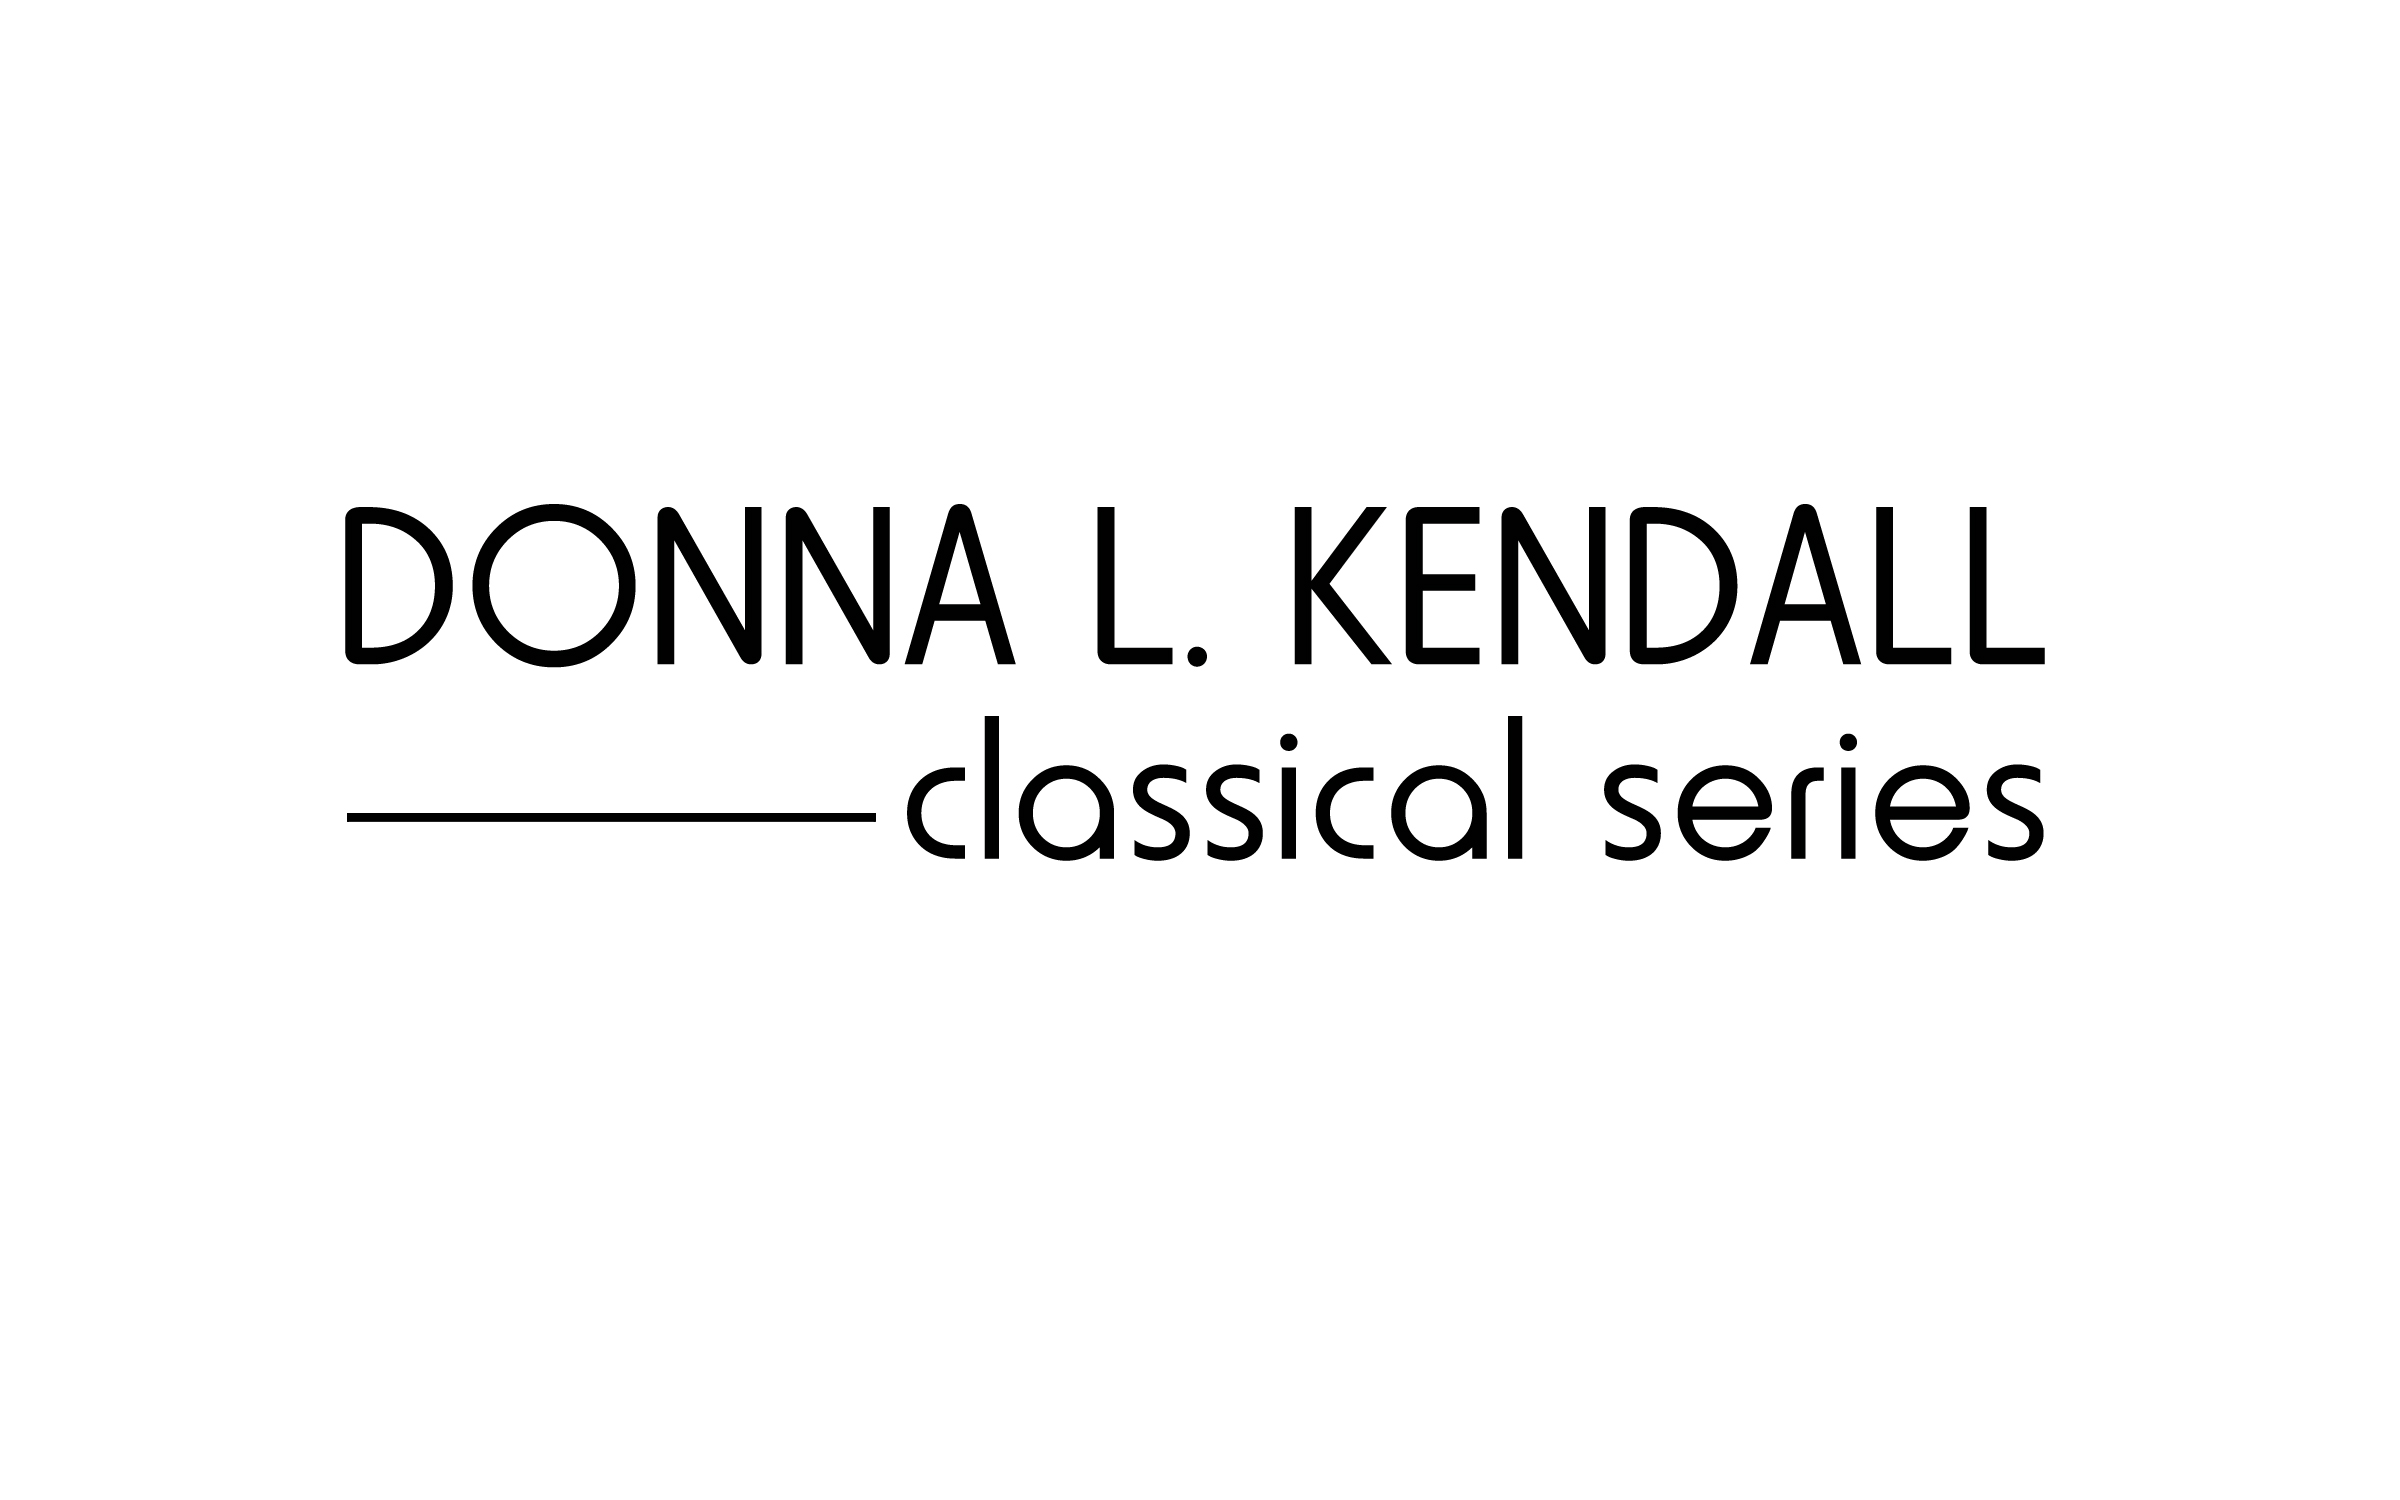 Donna L. Kendall Classical Series